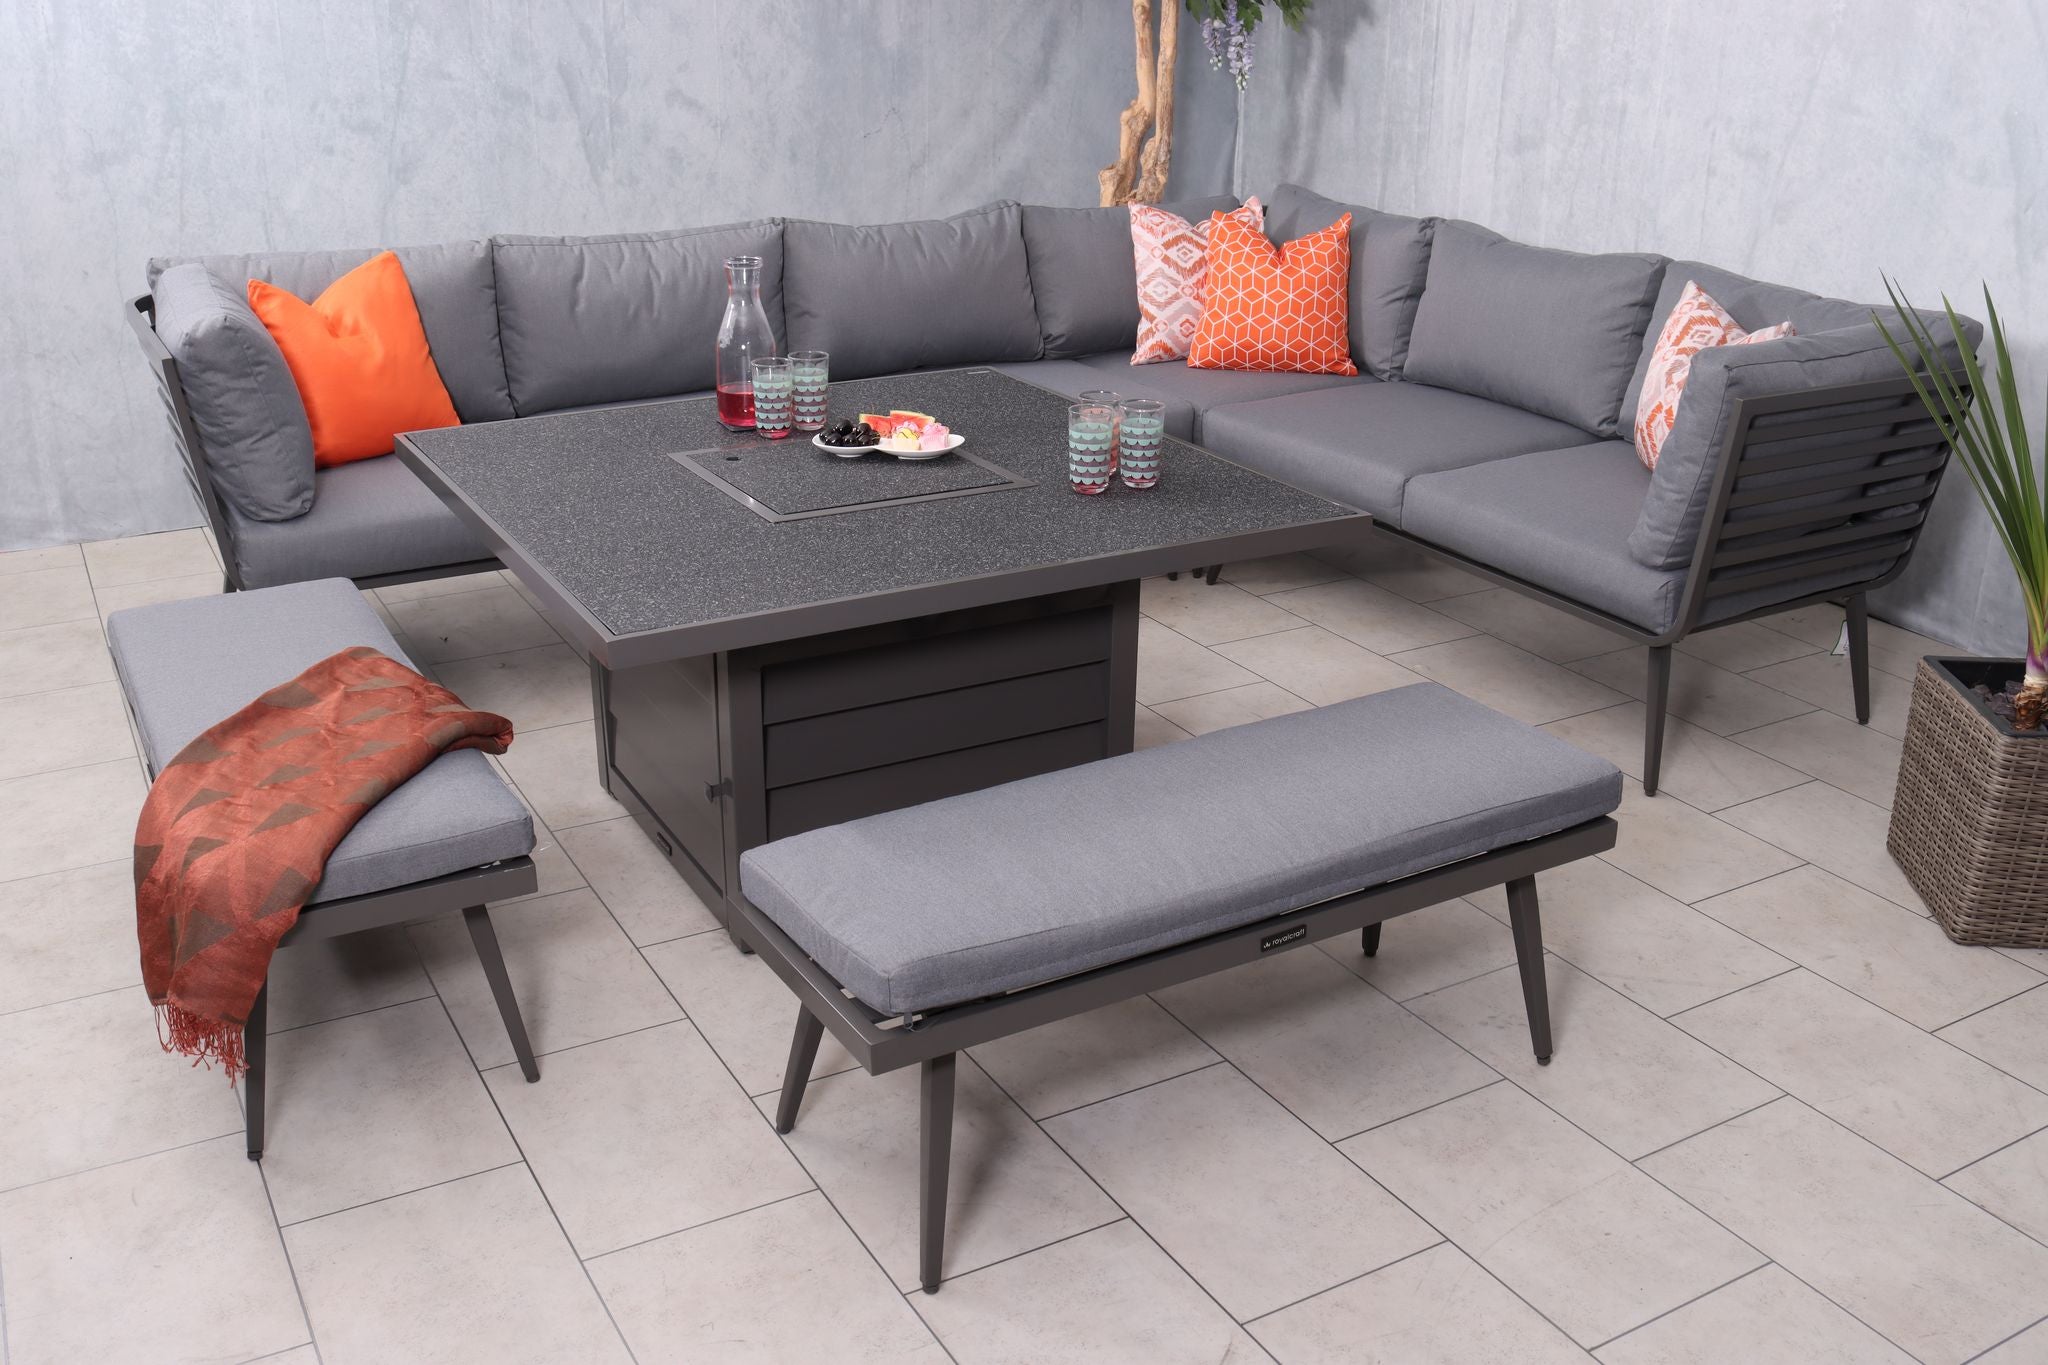 Royalcraft Mayfair Corner Lounging Set with Fire Pit – Grey